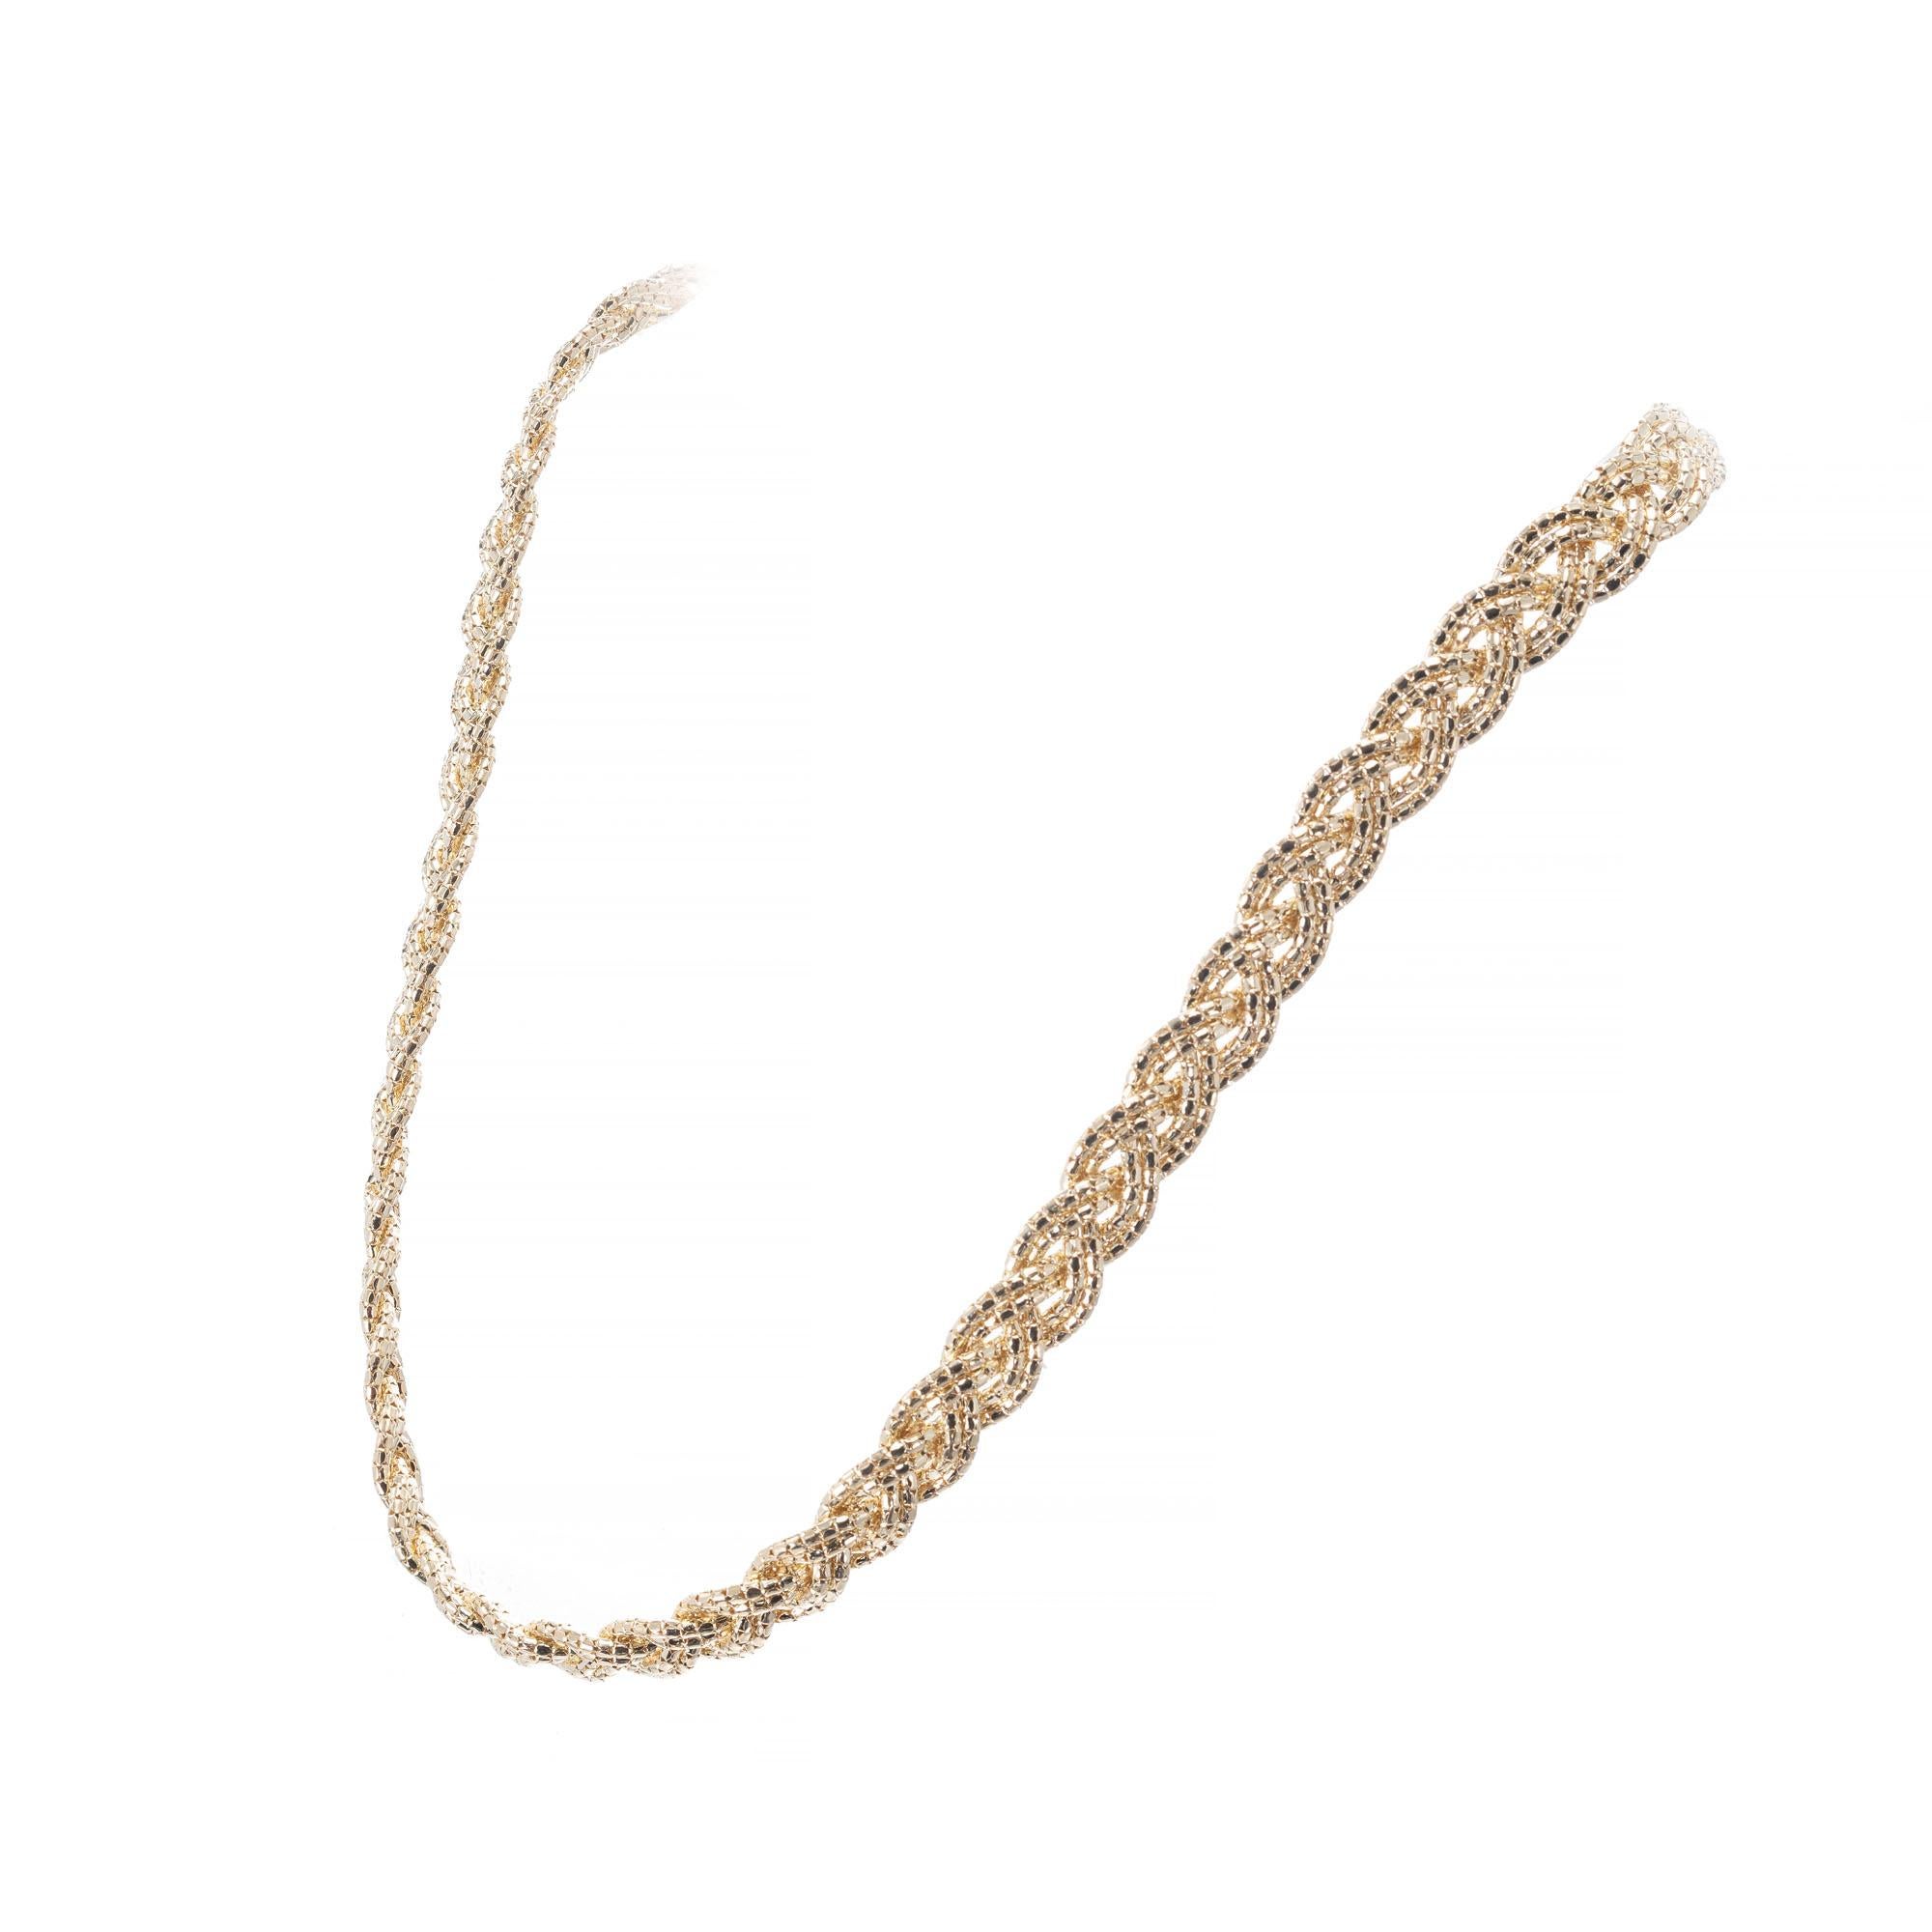 14k Yellow Gold Double Braided Chain 16 Inches Long 

14k yellow gold
Tested and stamped: 14k
21.6 grams
Length: 16 inches – Width: 8mm – Depth: 3mm
